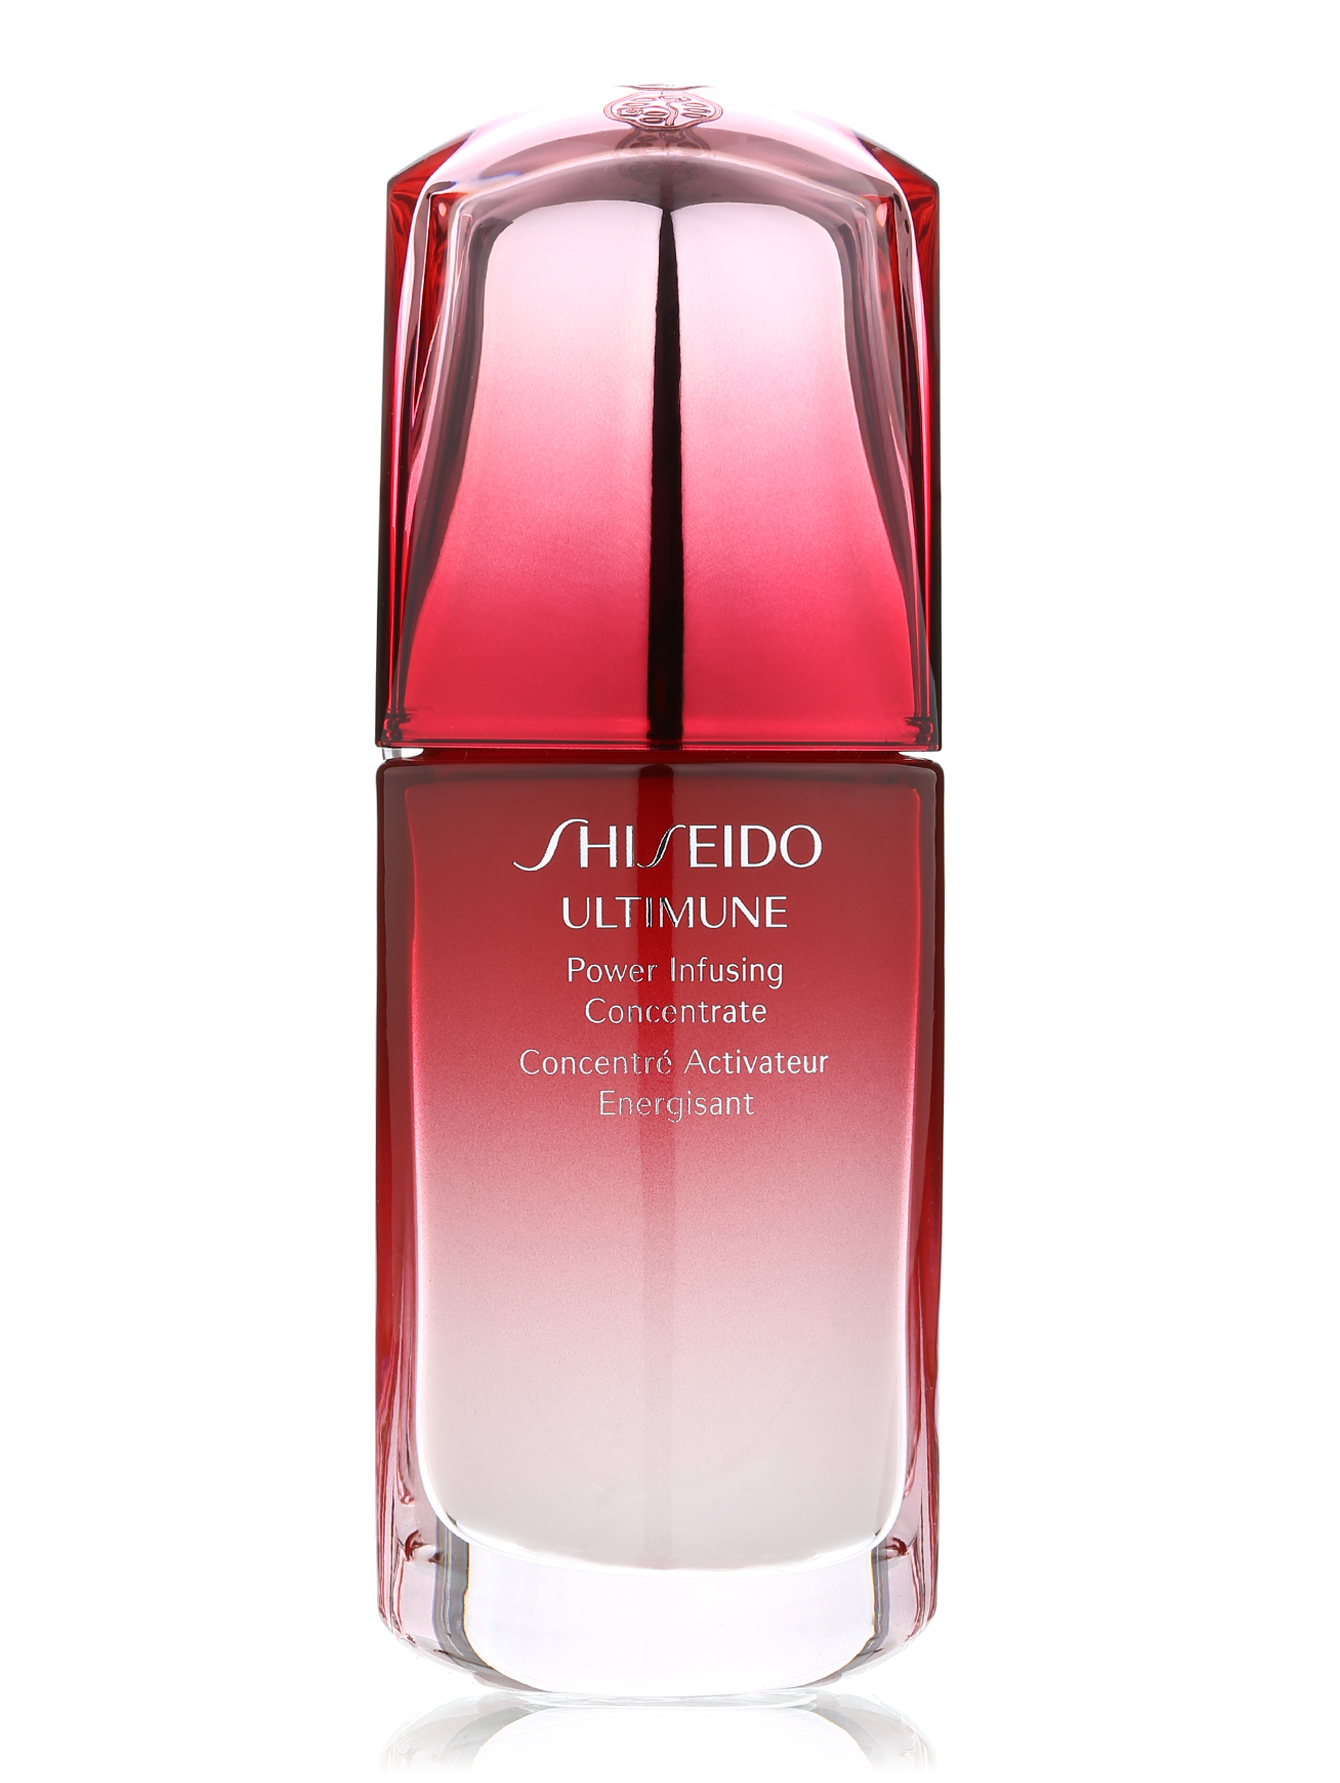 Shiseido concentrate. Ultimune концентрат шисейдо. Концентрат Shiseido Ultimune Power infusing Concentrate. Ультимьюн шисейдо. Шисейдо ультимейт.